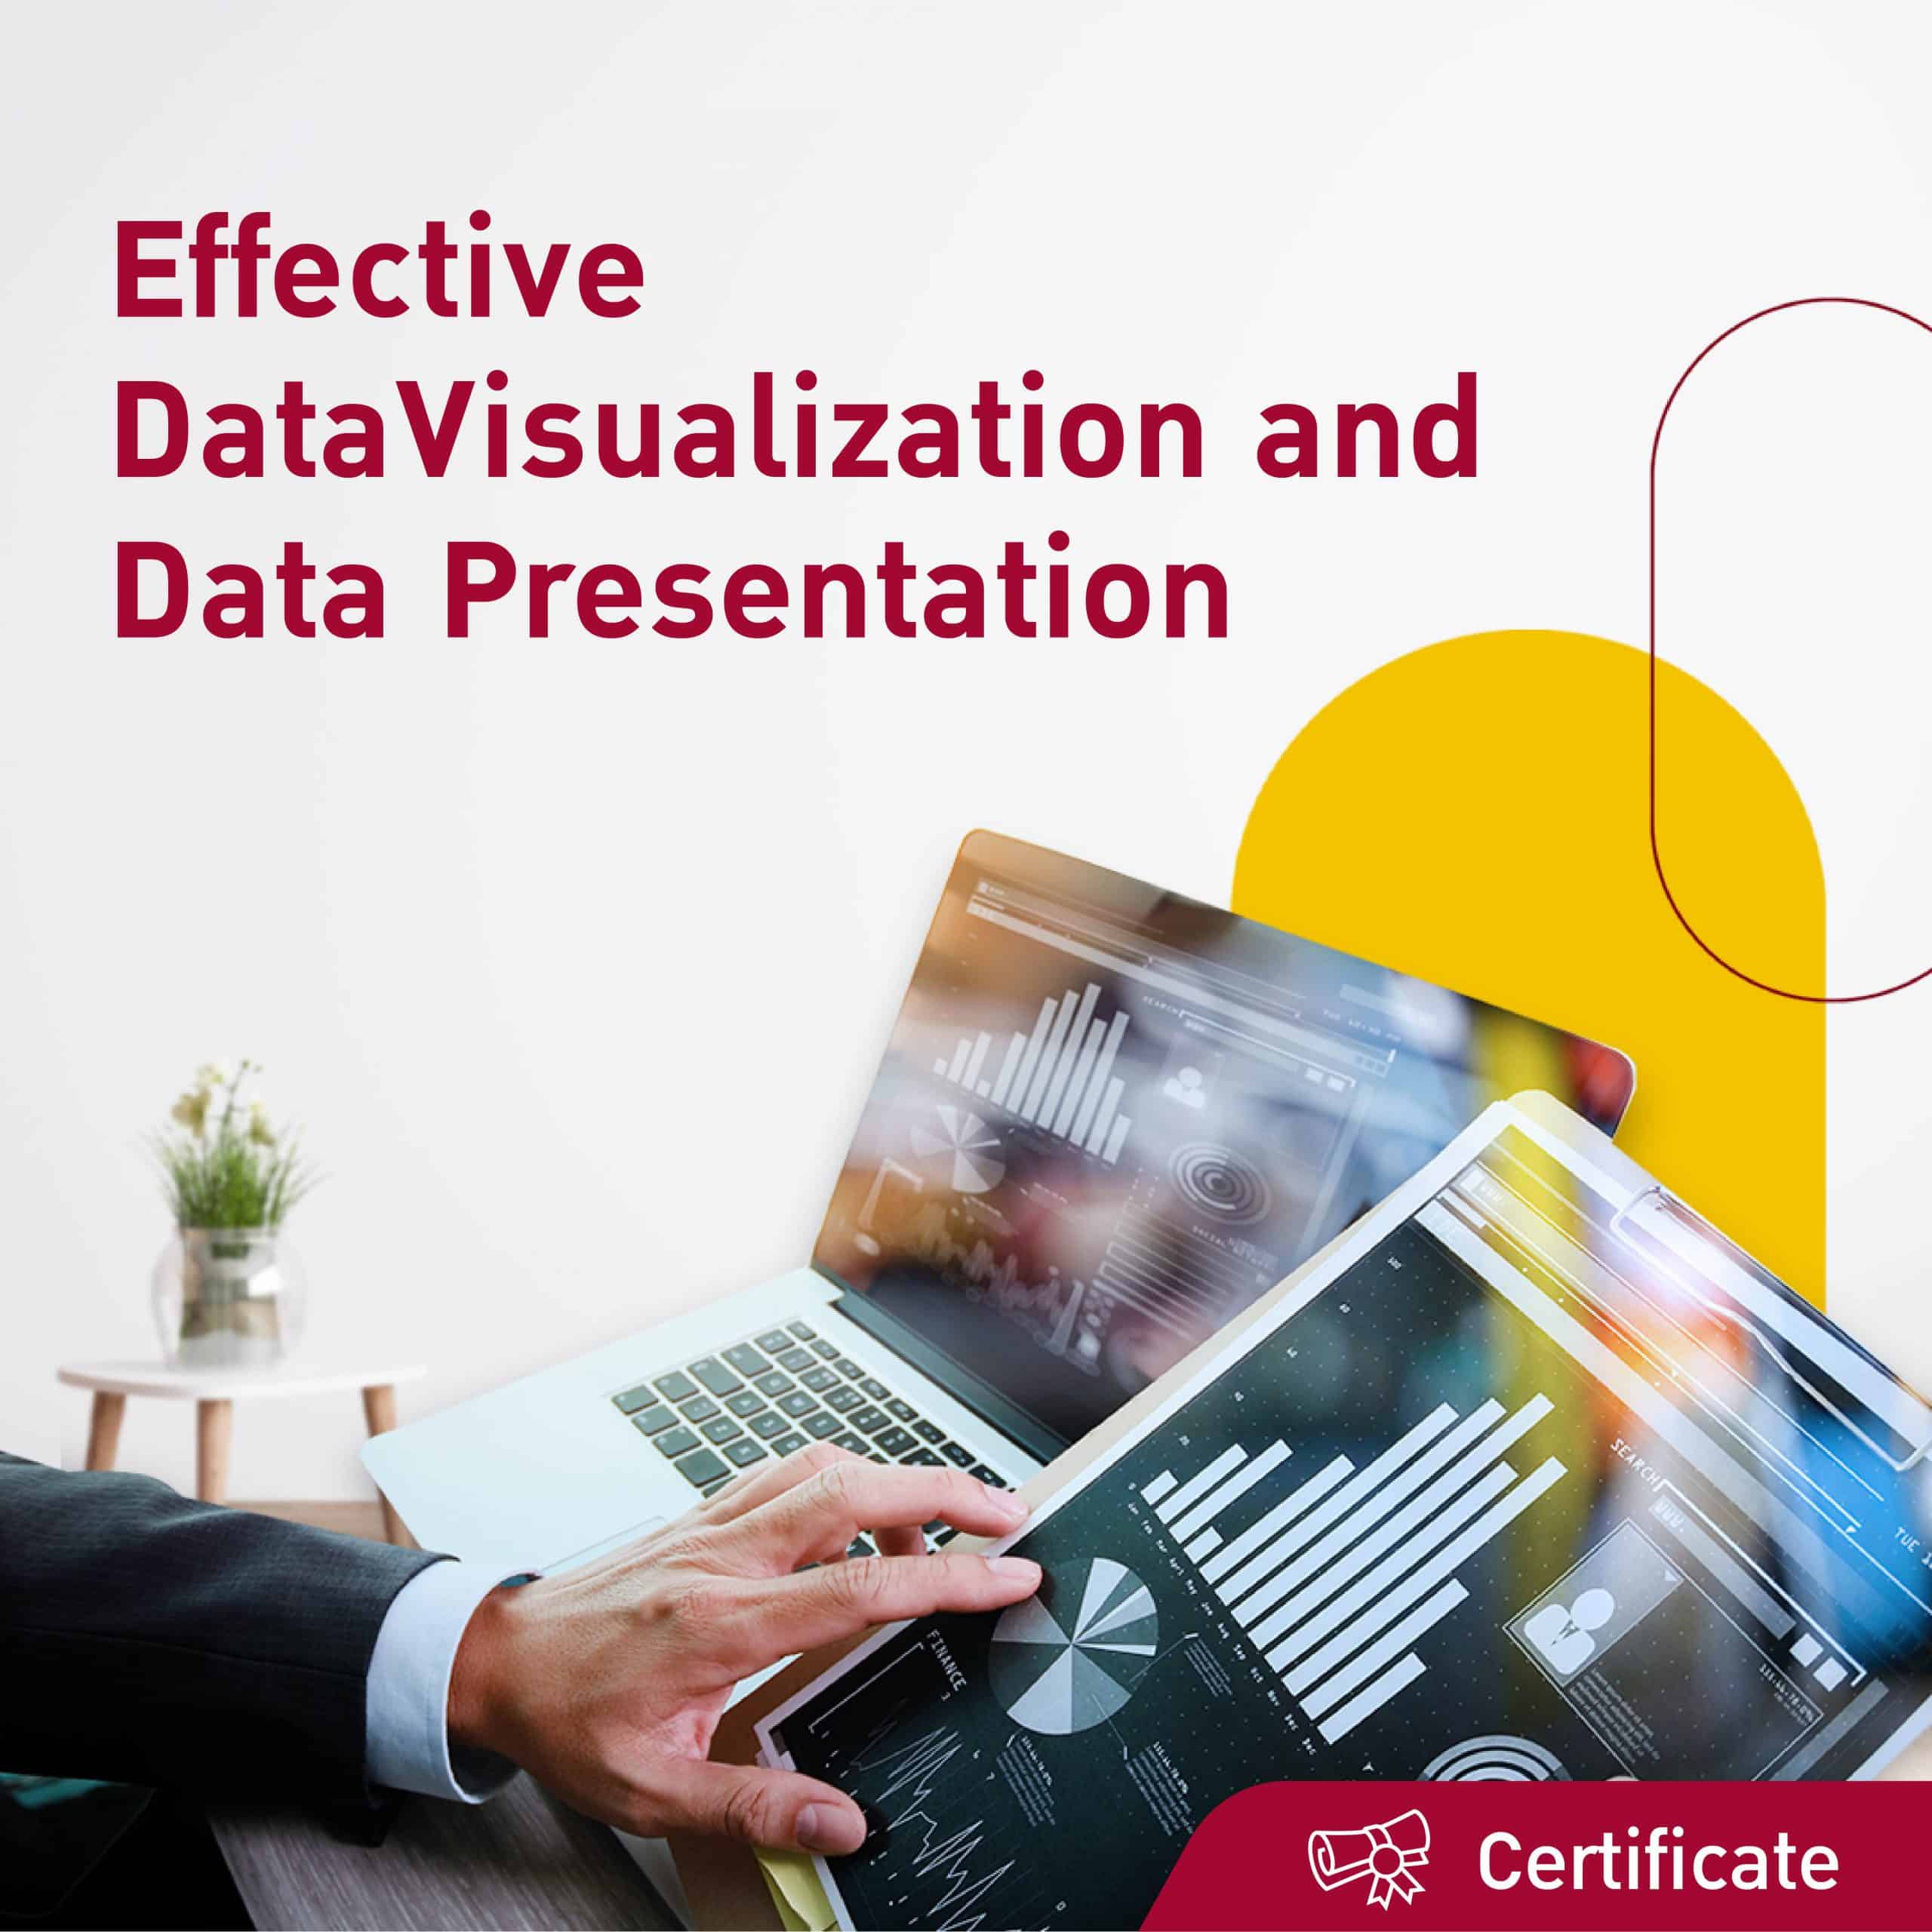 AW_Jobs Base Learning_Effective Data Visualization and Data_1080x1080 (1)